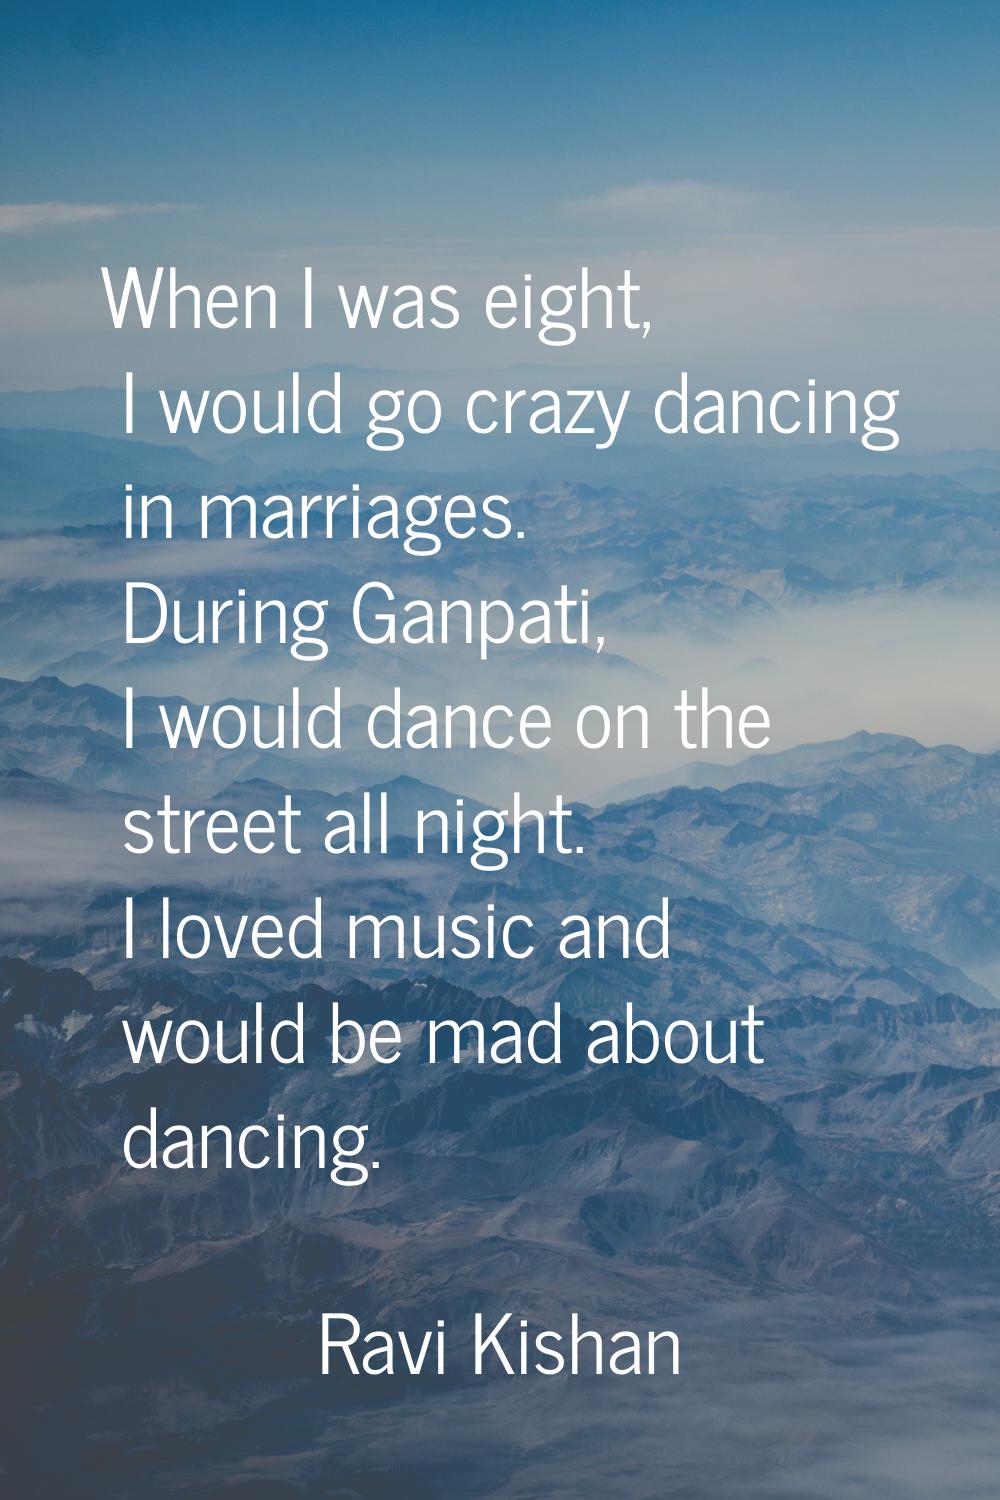 When I was eight, I would go crazy dancing in marriages. During Ganpati, I would dance on the stree